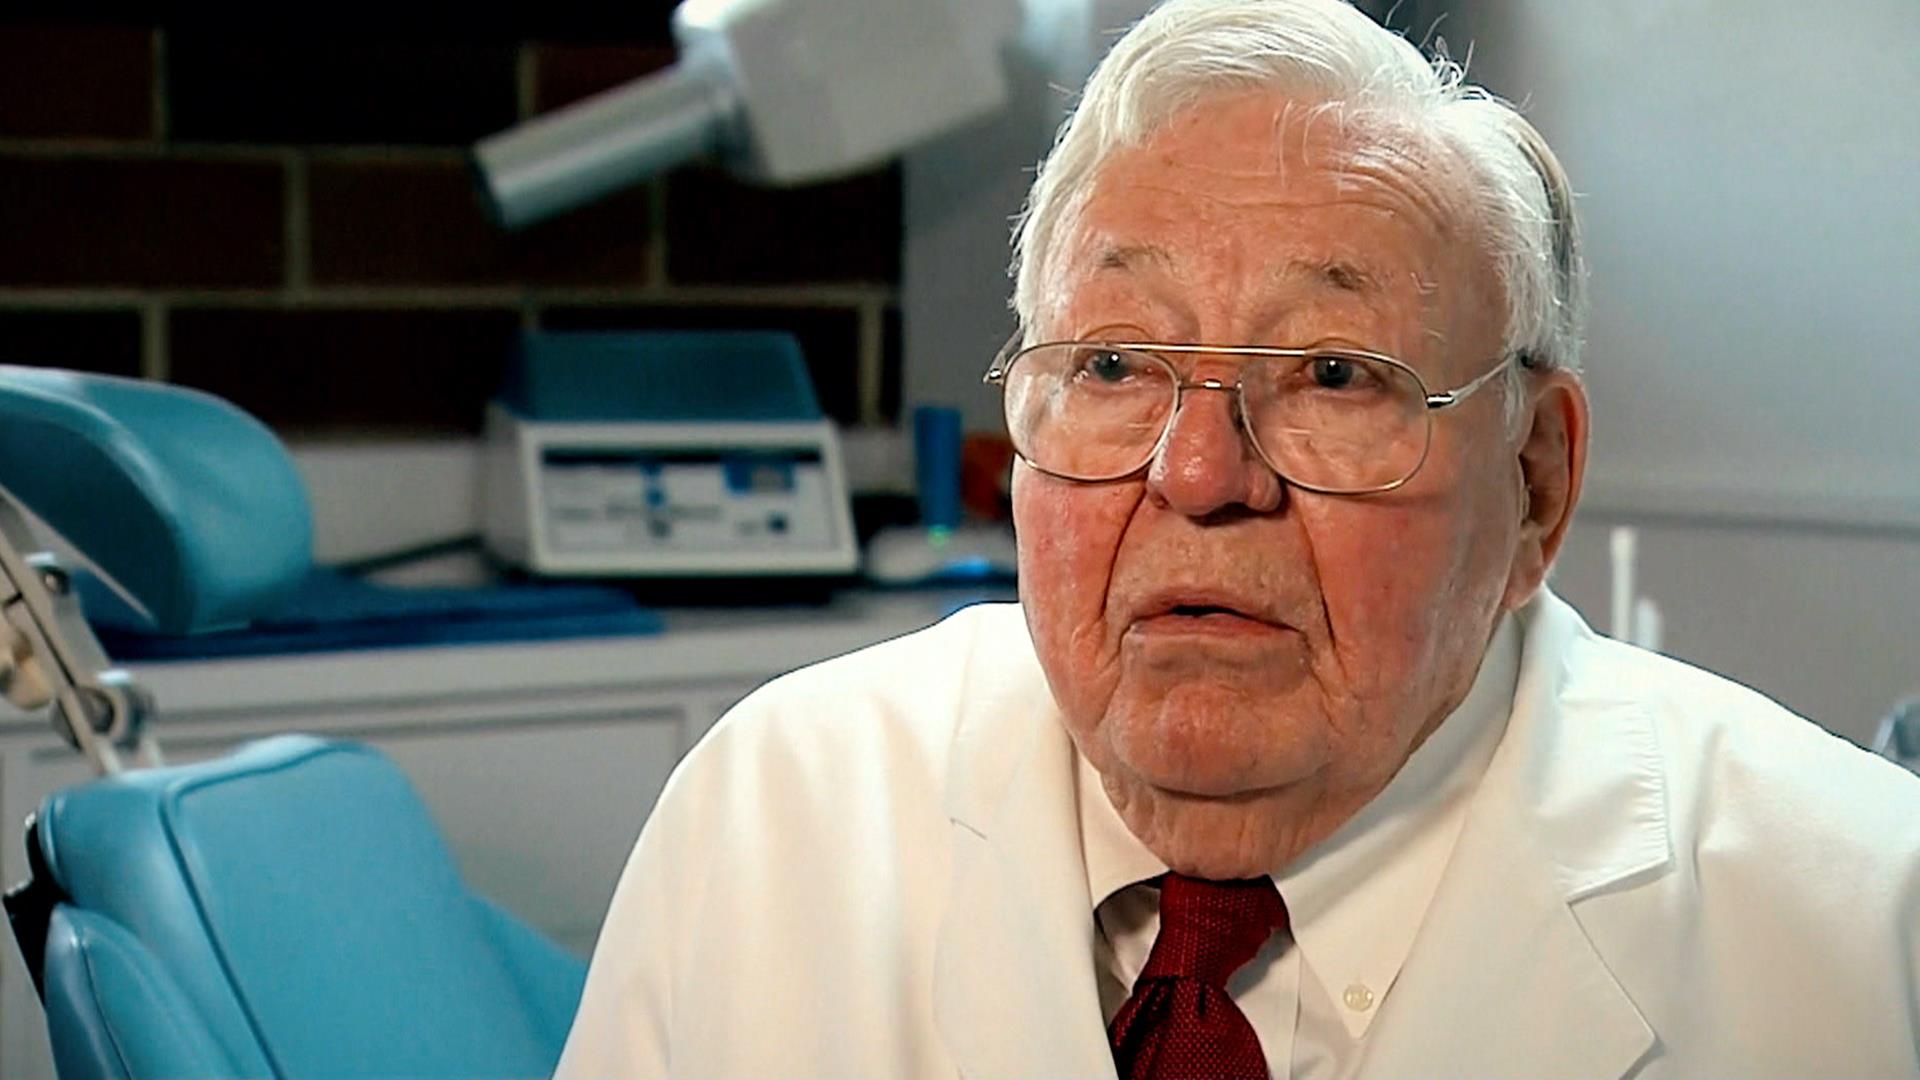 Live to 100: Meet the 81-year-old dentist who's still going strong after 58 years